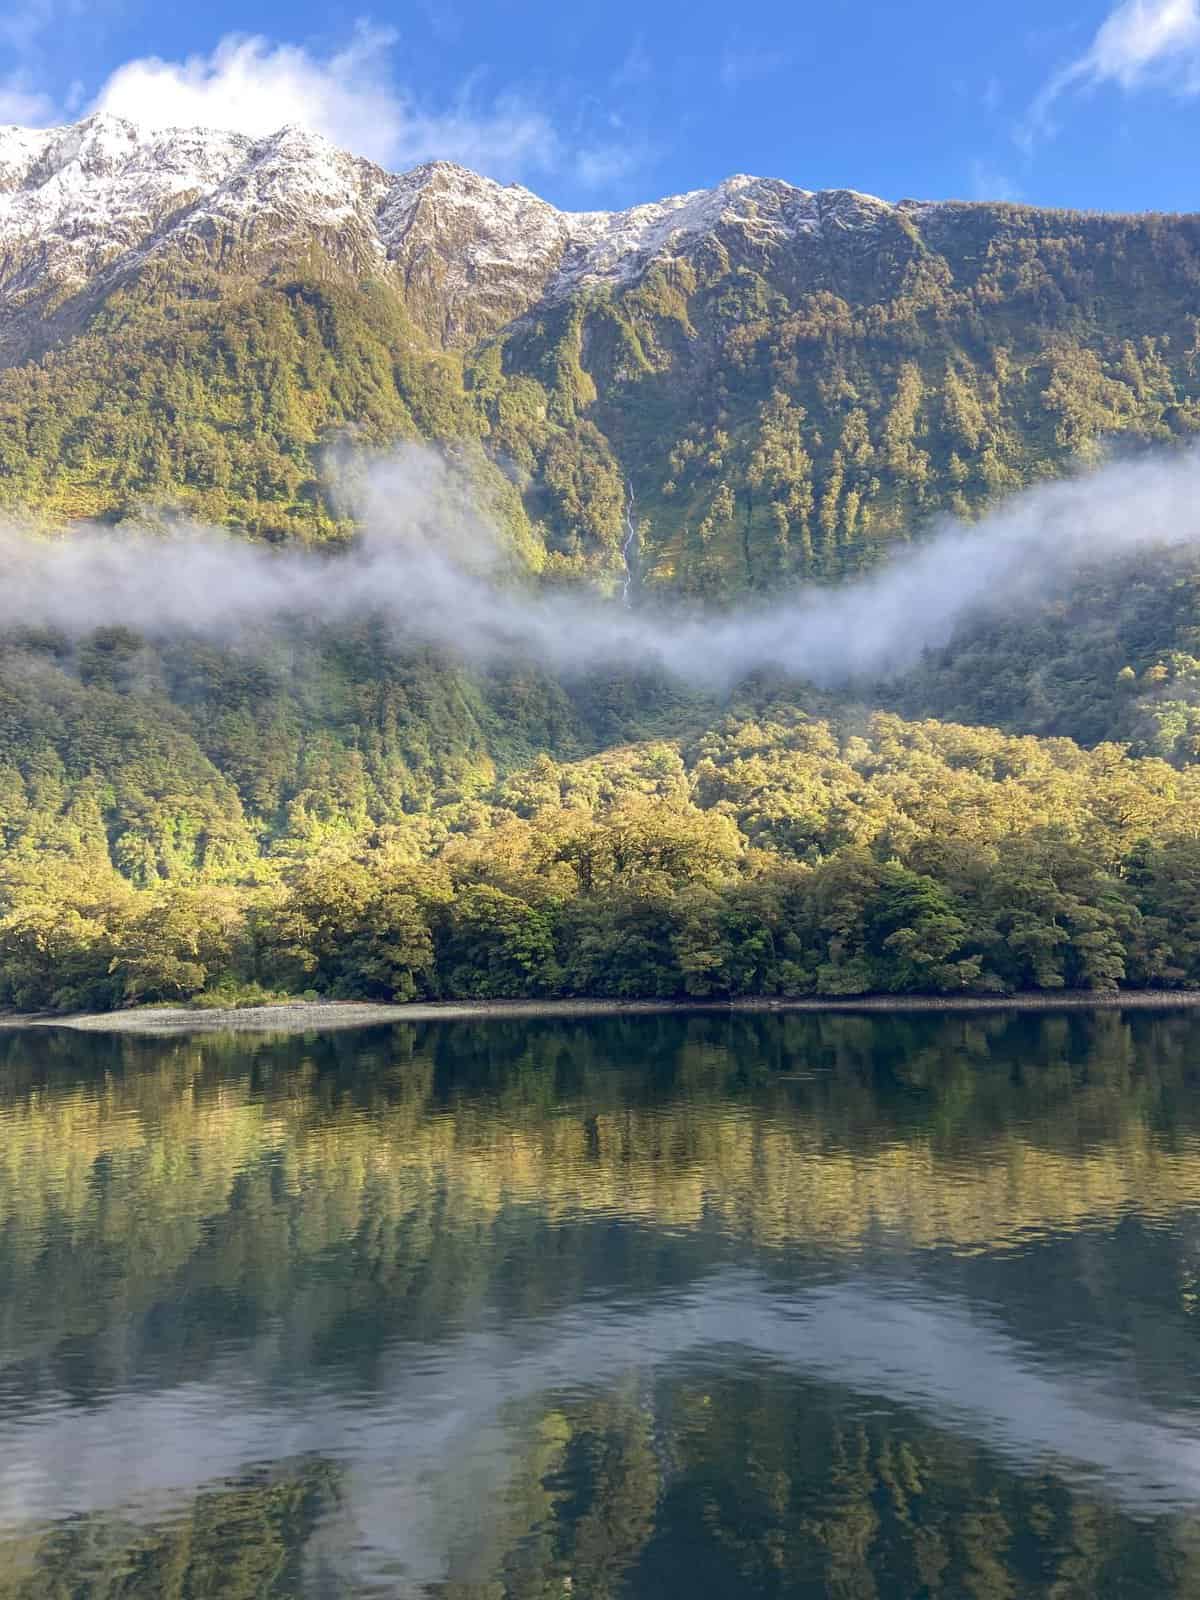 Clouds lifting off the water in Doubtful Sound